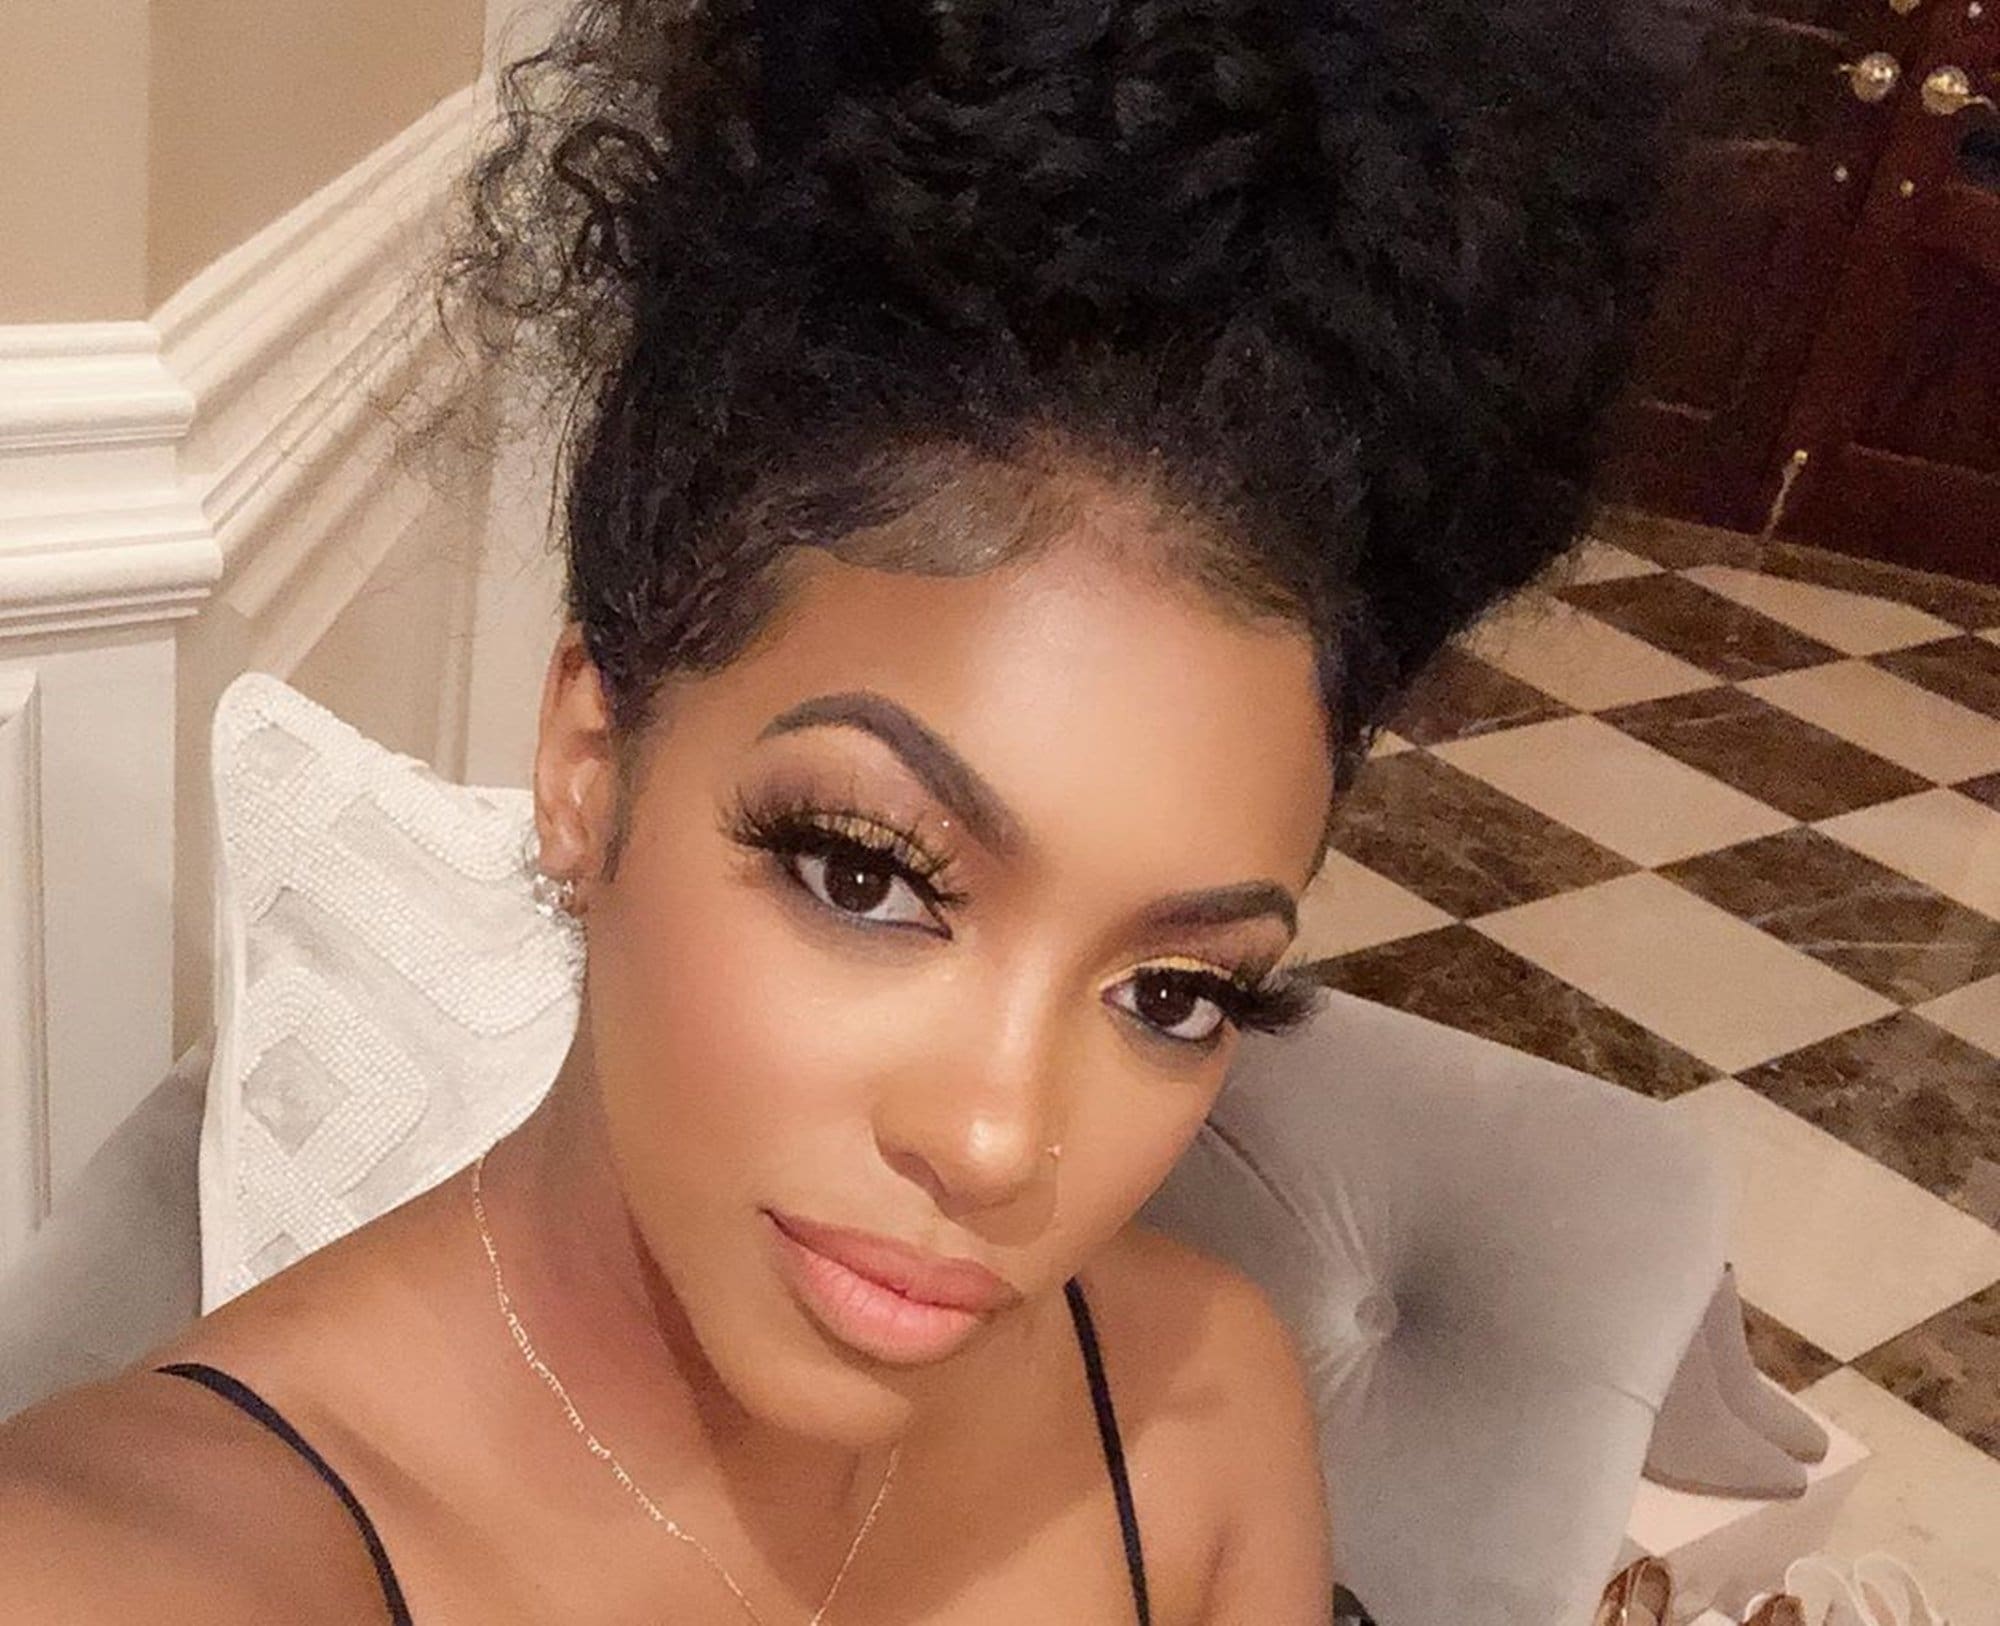 Porsha Williams' Family Photos Have Fans In Awe - People Are Confident She And Dennis McKinley Will Fix Things